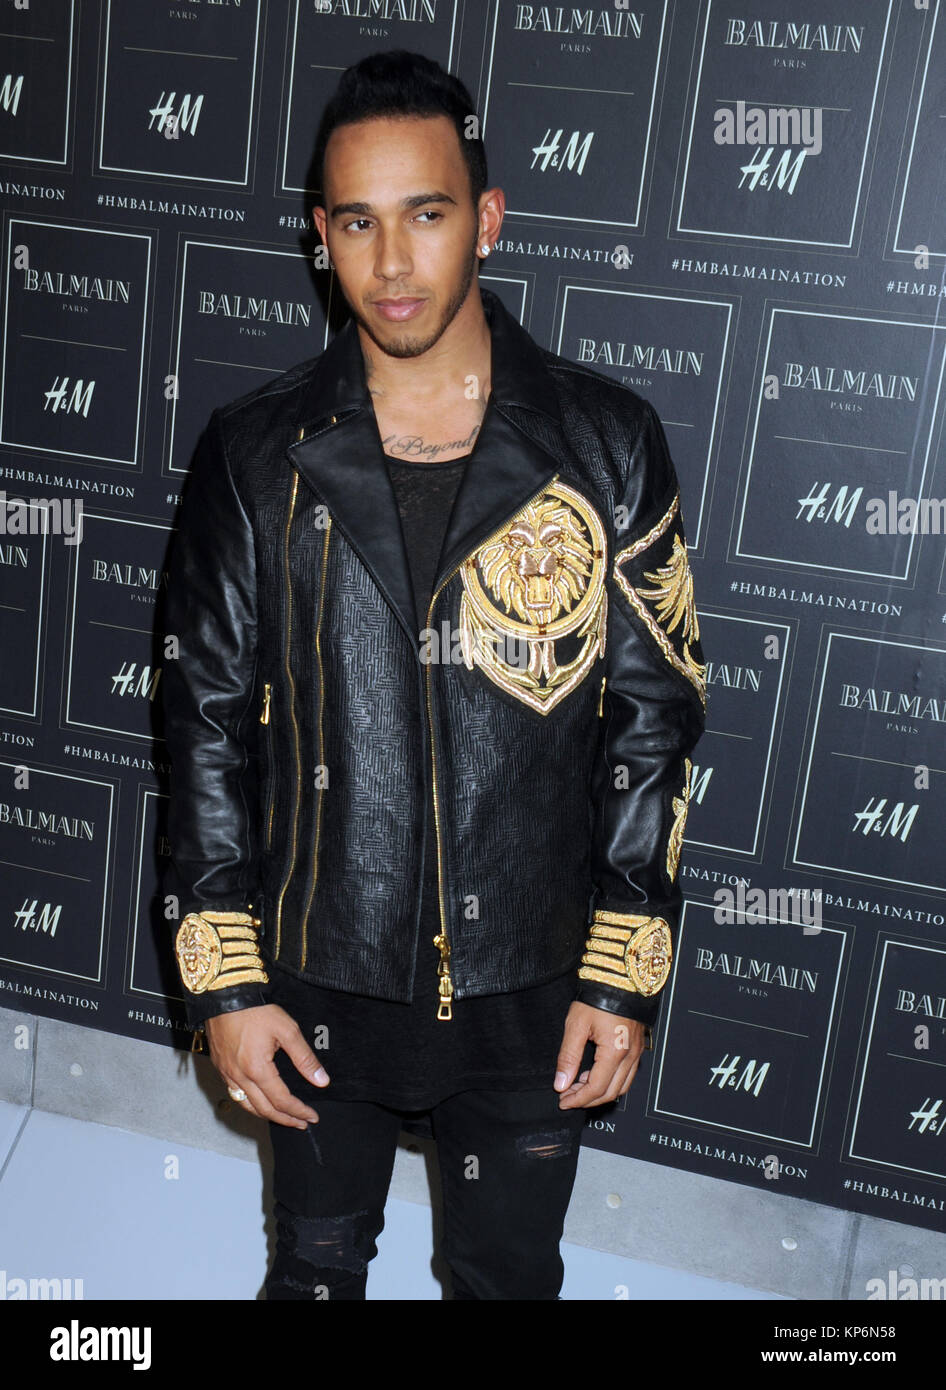 kulstof udvikling Svømmepøl NEW YORK, NY - OCTOBER 20: Lewis Hamilton at the BALMAIN X H&M collection  launch event at 23 Wall Street on October 20, 2015 in New York City.  People: Lewis Hamilton Stock Photo - Alamy